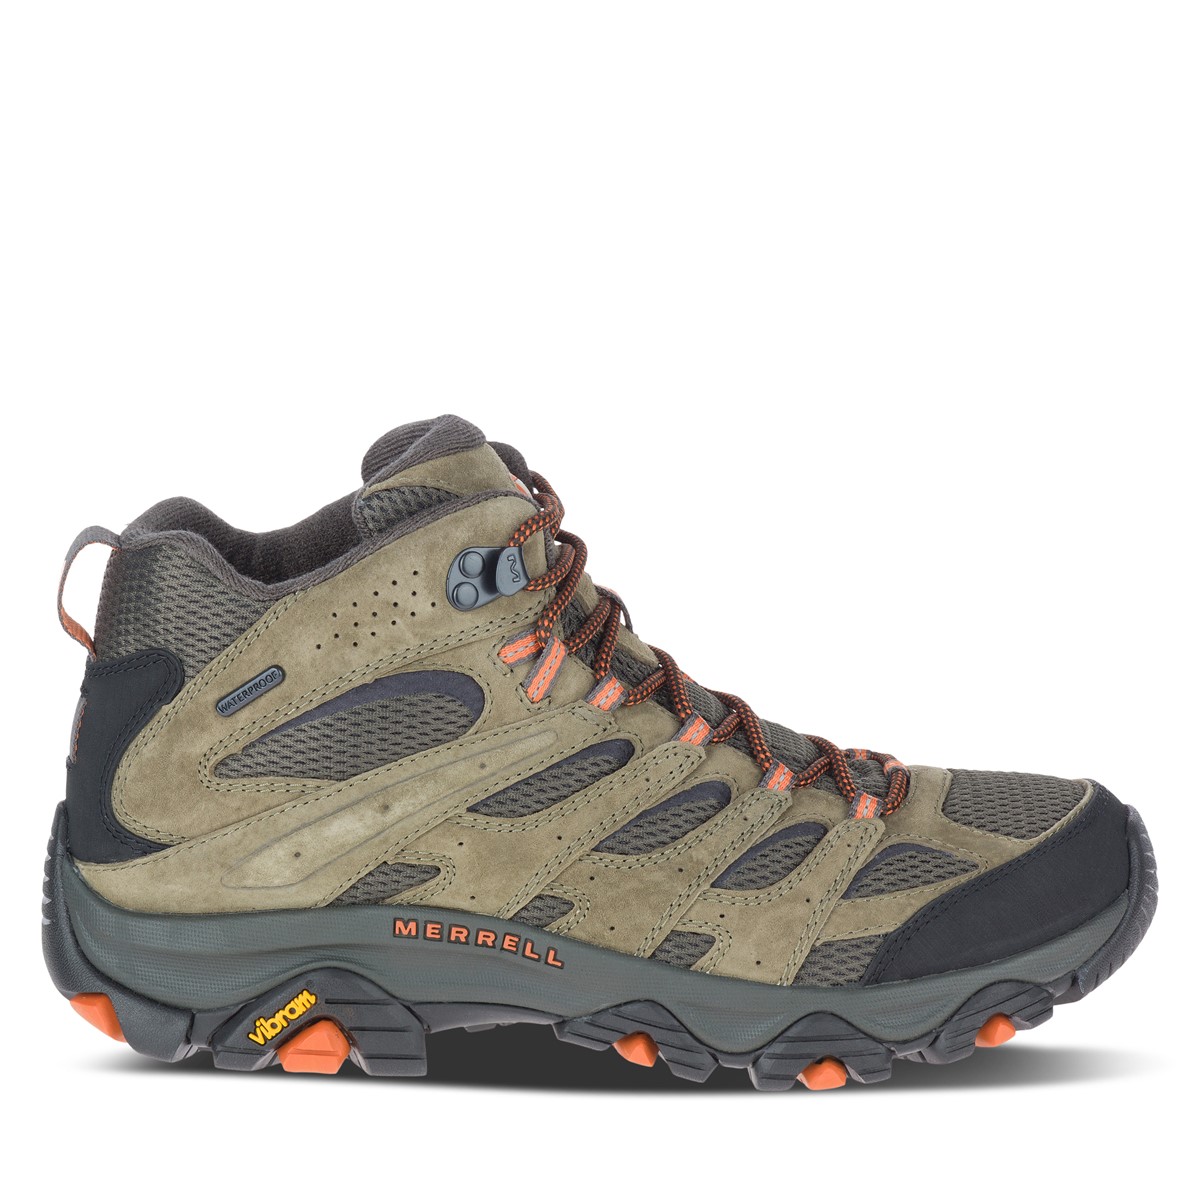 Men's Moab 3 Mid Waterproof Hiking Boots in Olive/Black